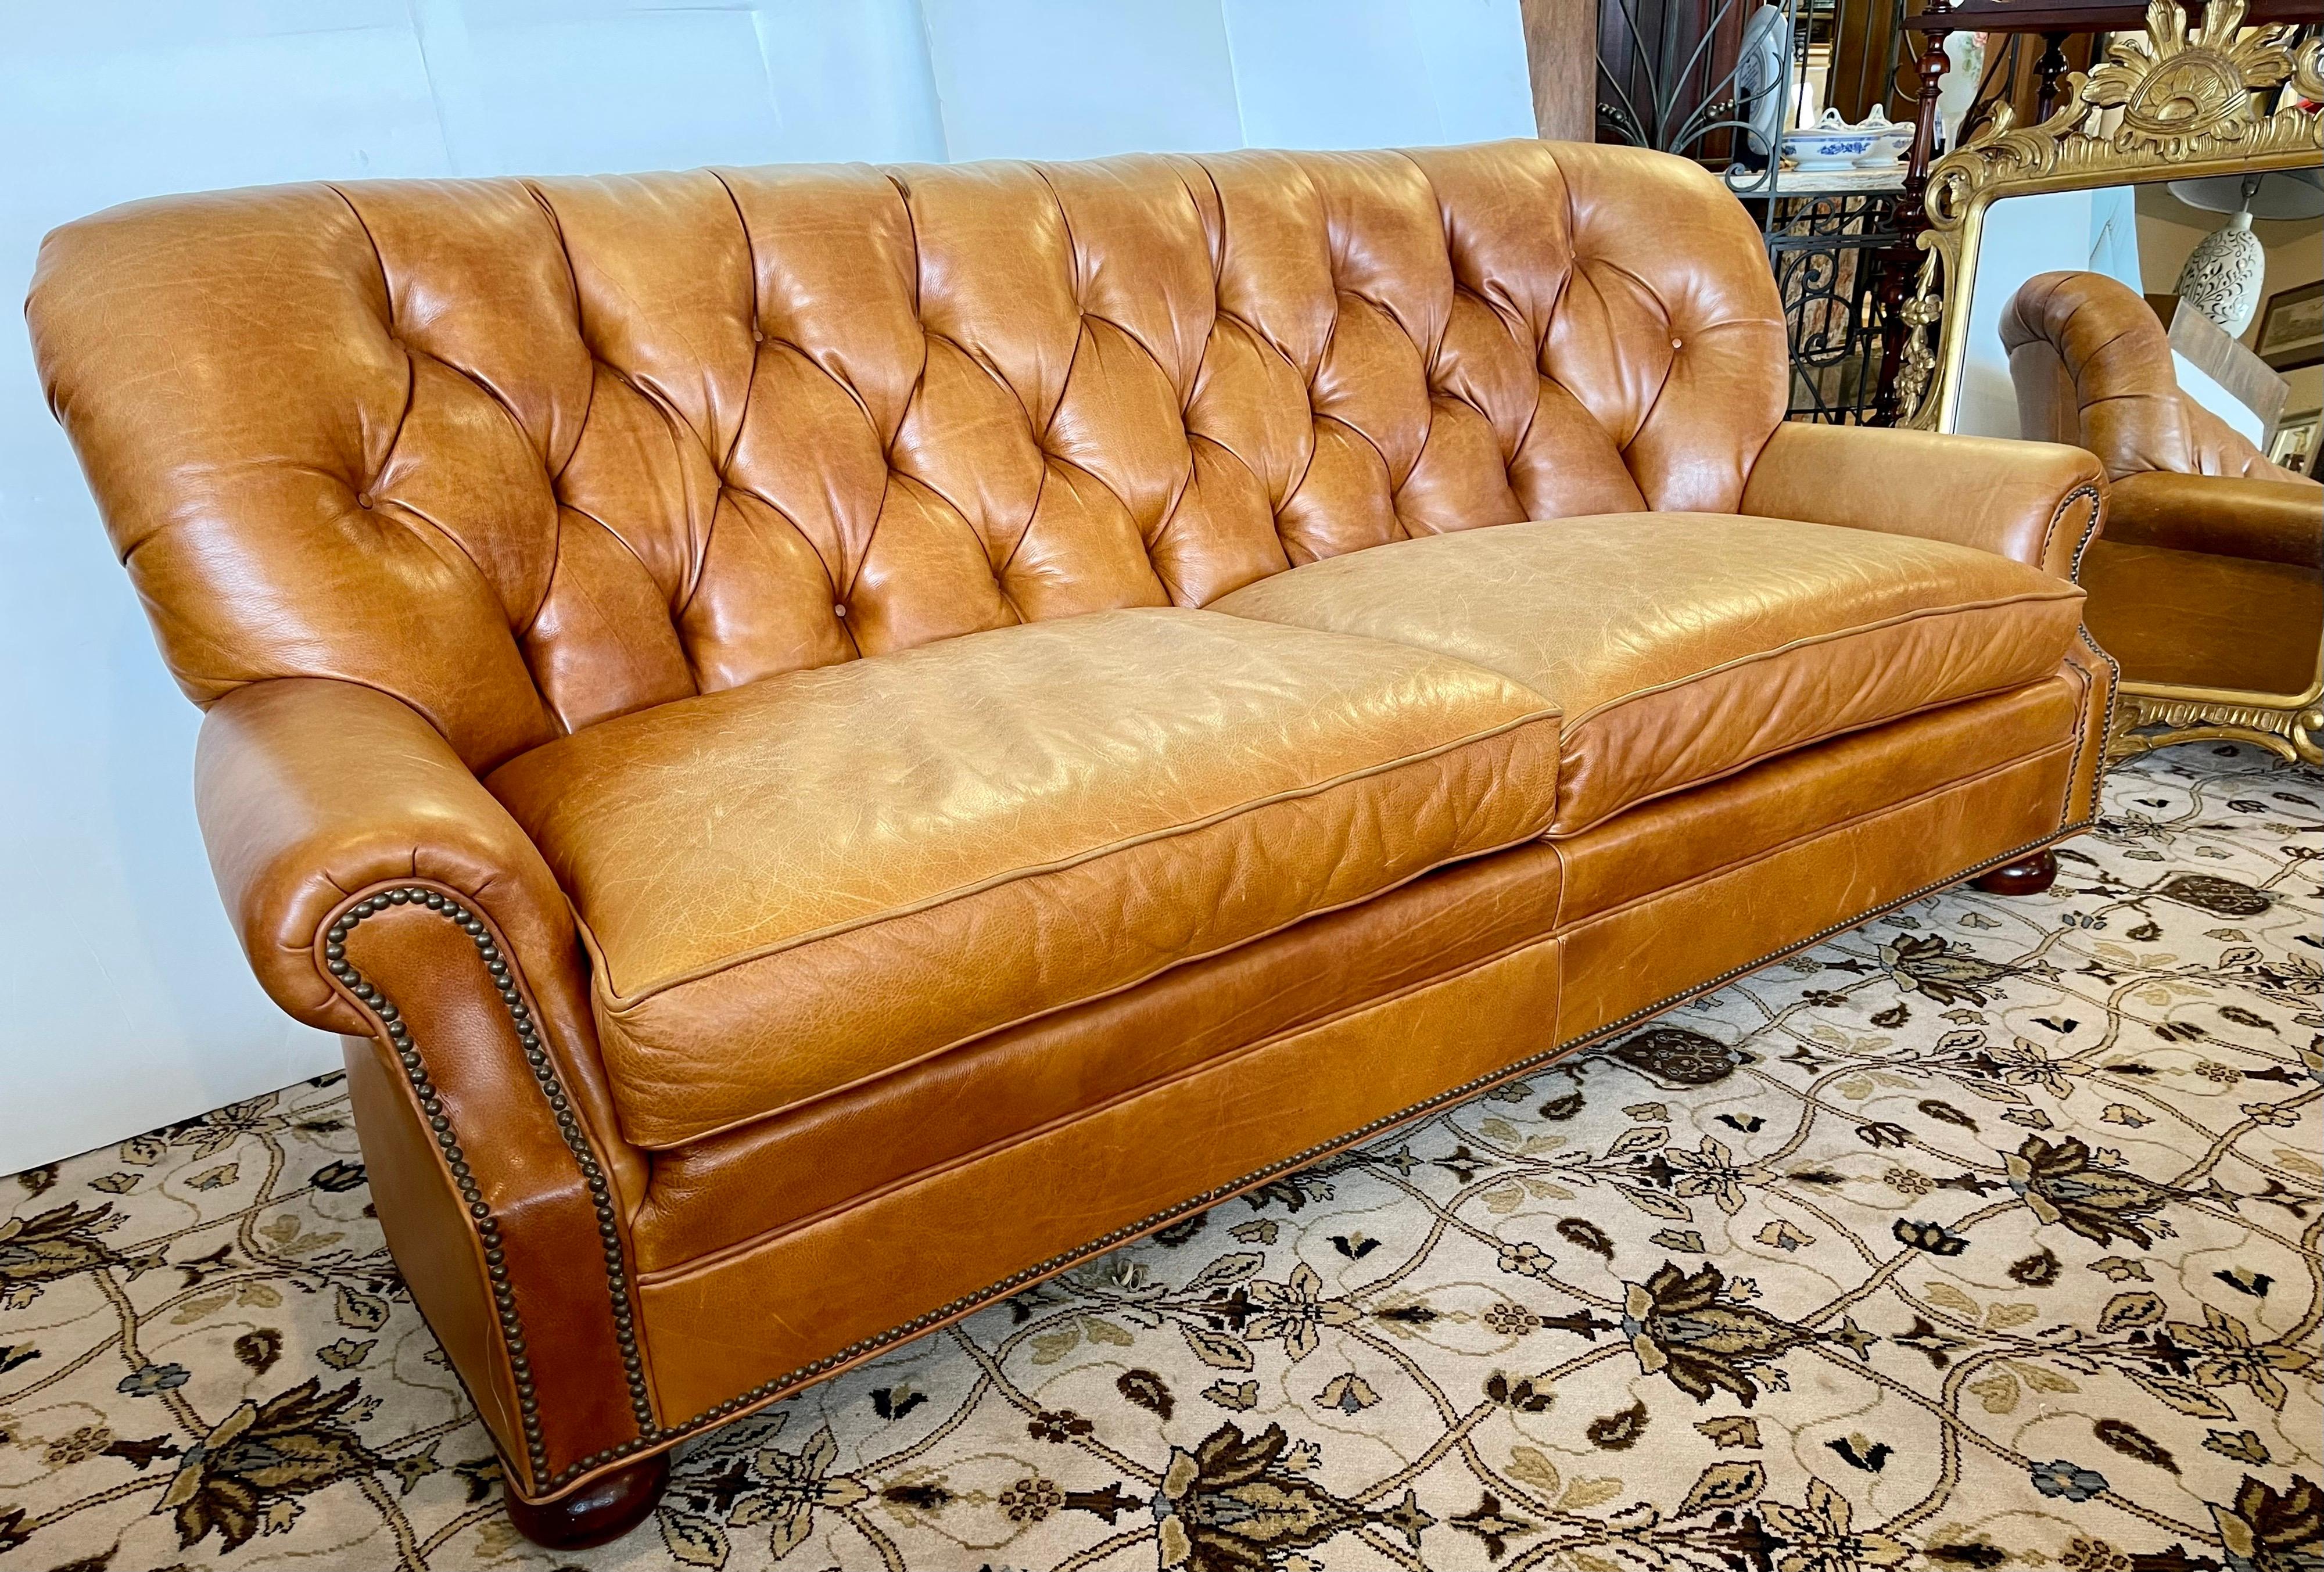 Stunning signed Hickory Chair Company Chesterfield sofa. Note we have the matching chair and ottoman combo also exclusively on 1stDibs this week as well. The pebbled caramel color leather has been broken in just right and there is some fading on the